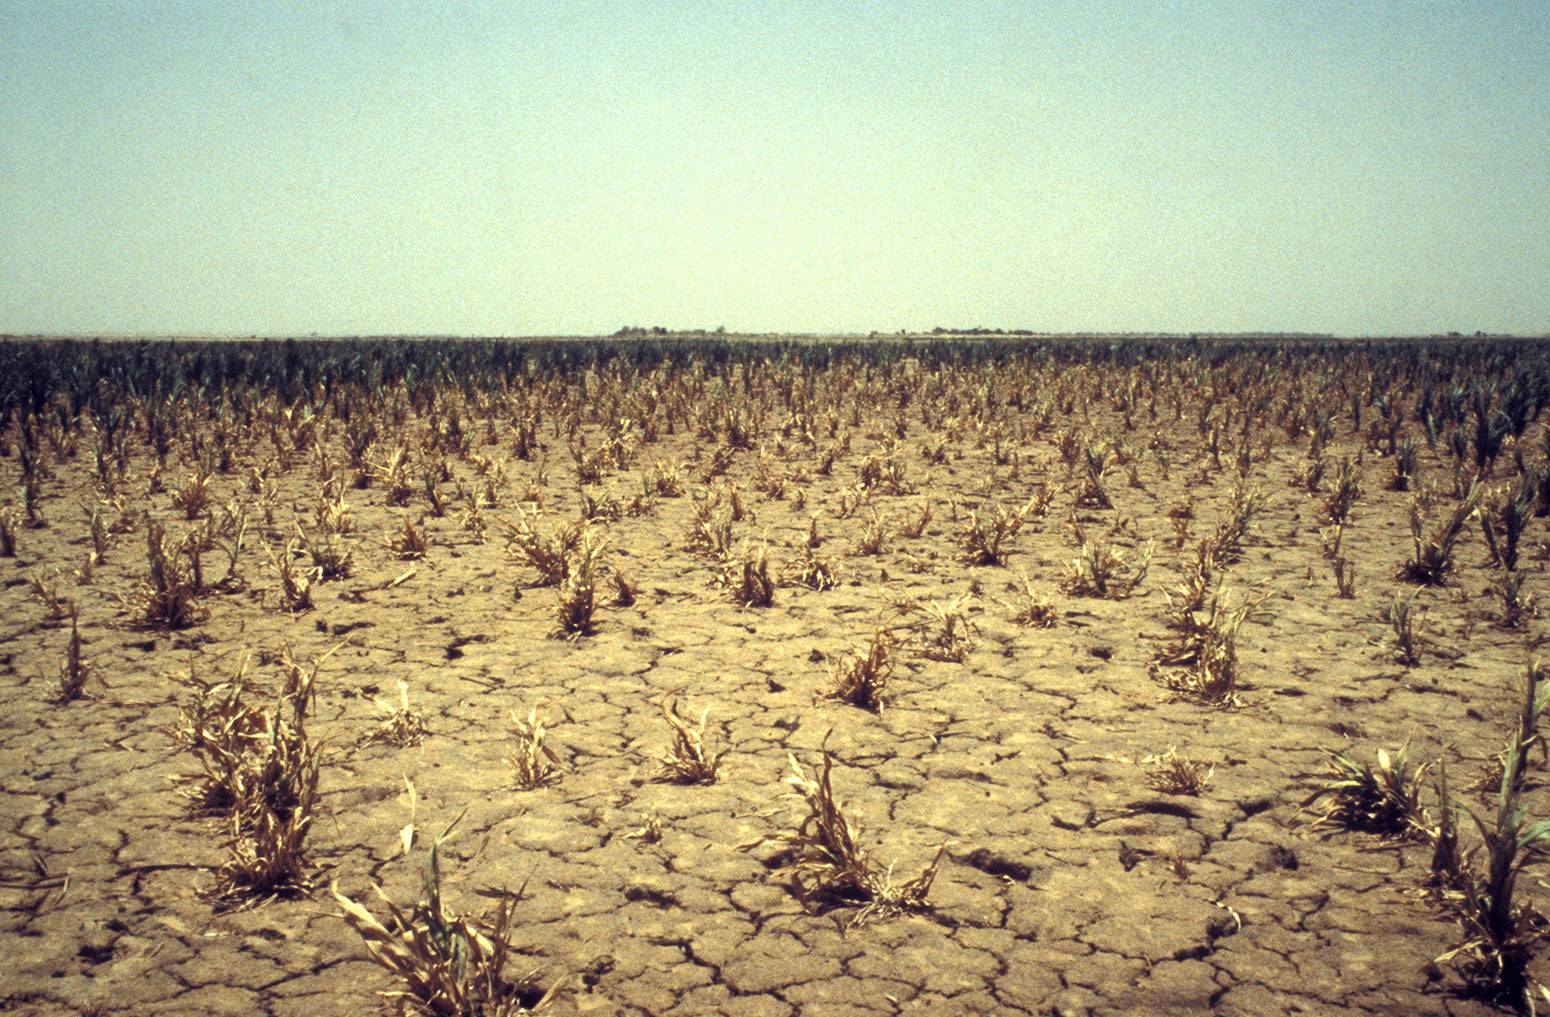 Drought in the Sahel region of Mali, between 1984-85. Credit: frans lemmens / Alamy Stock Photo. AEFD7P